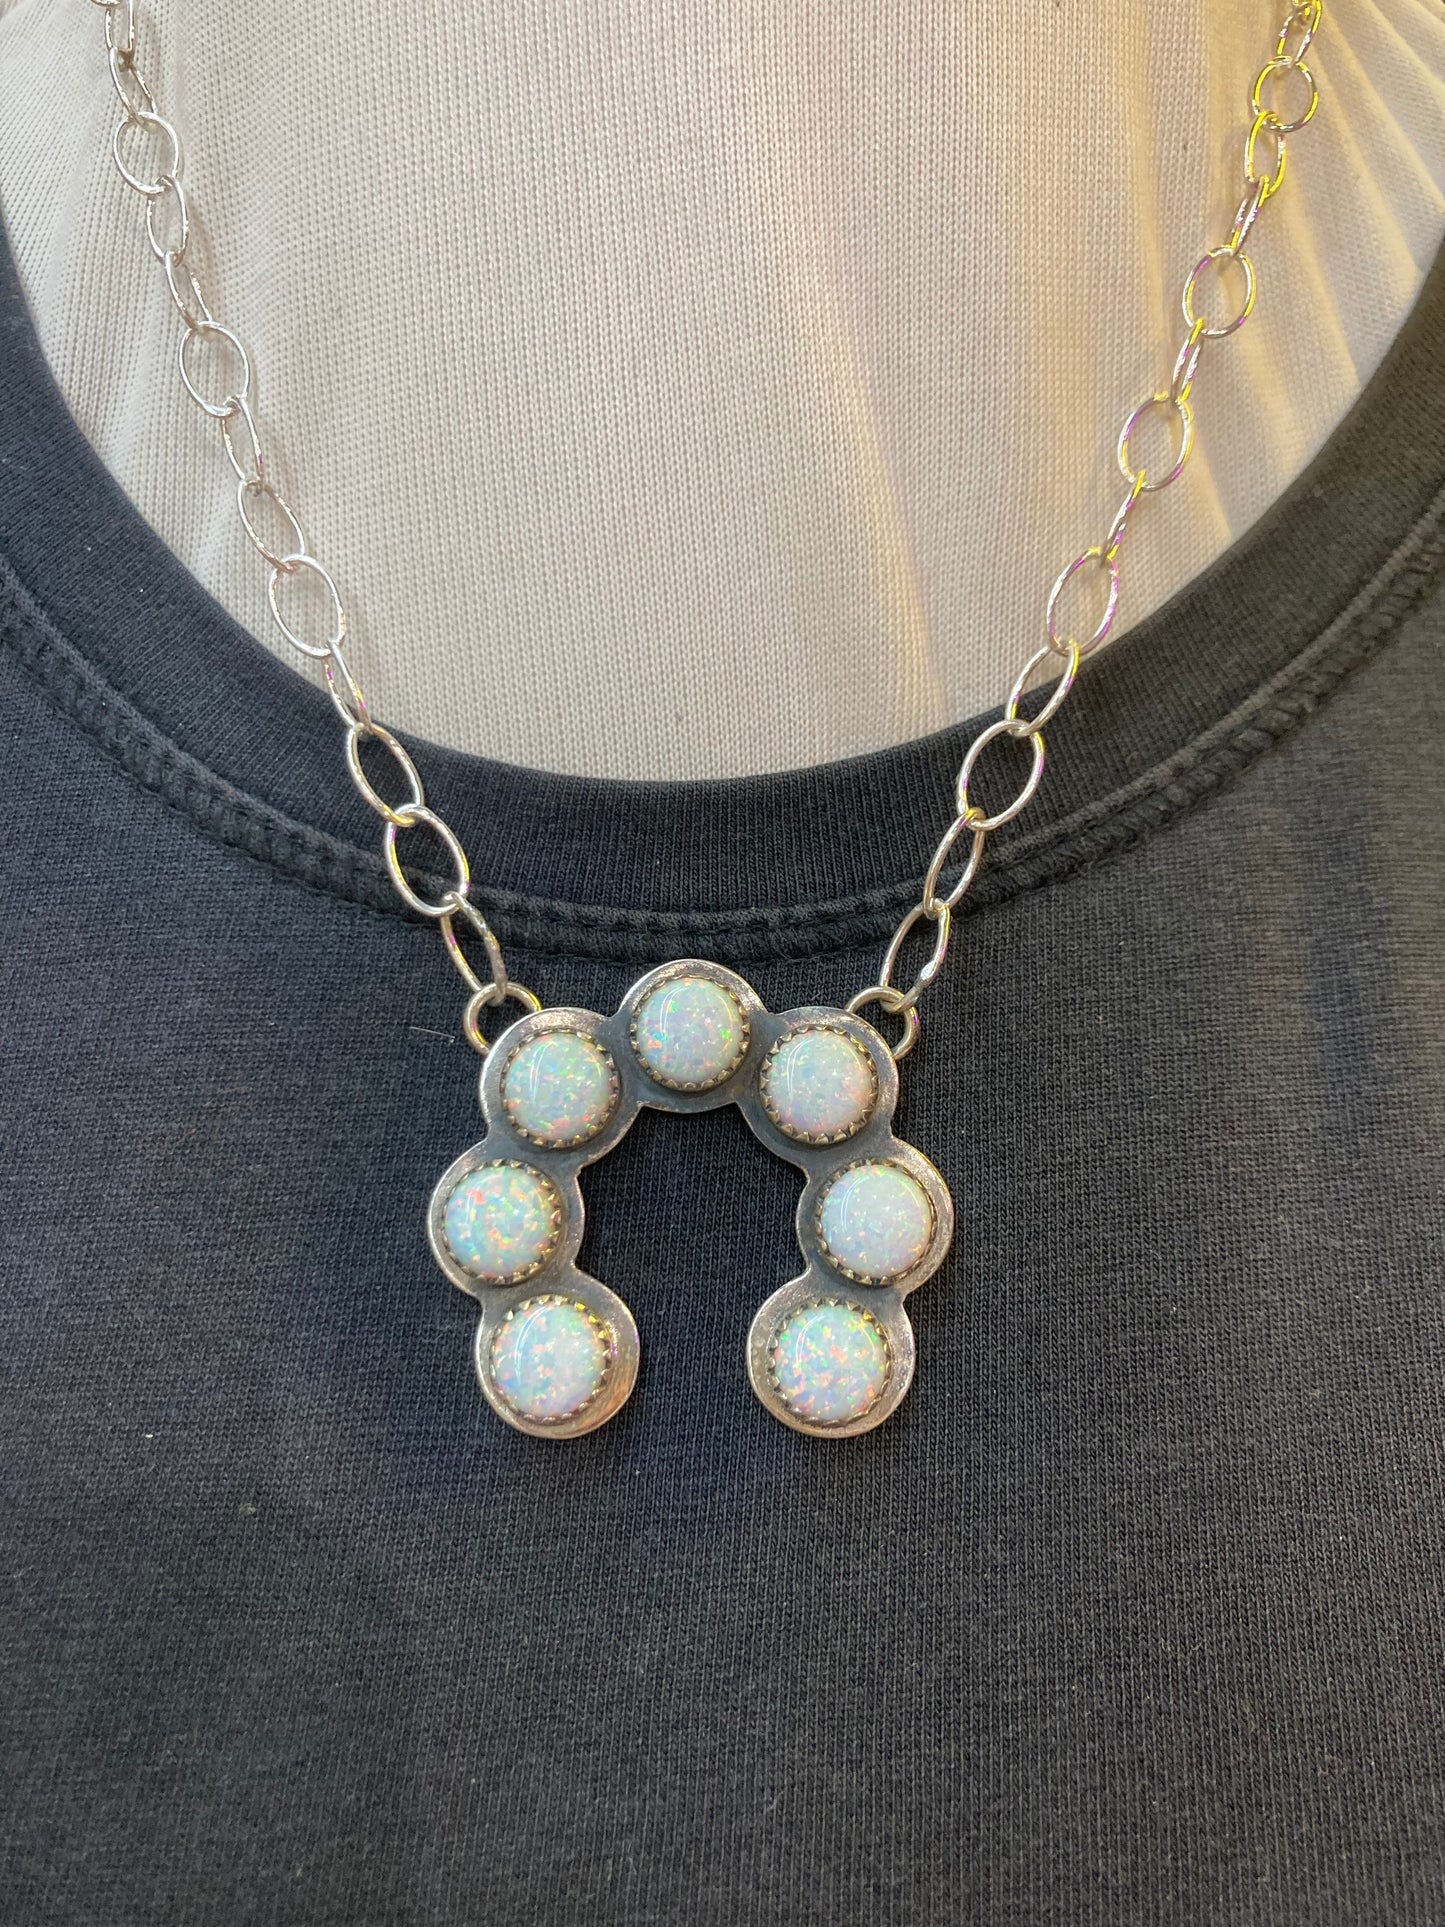 White Opal 7 Stone Necklace